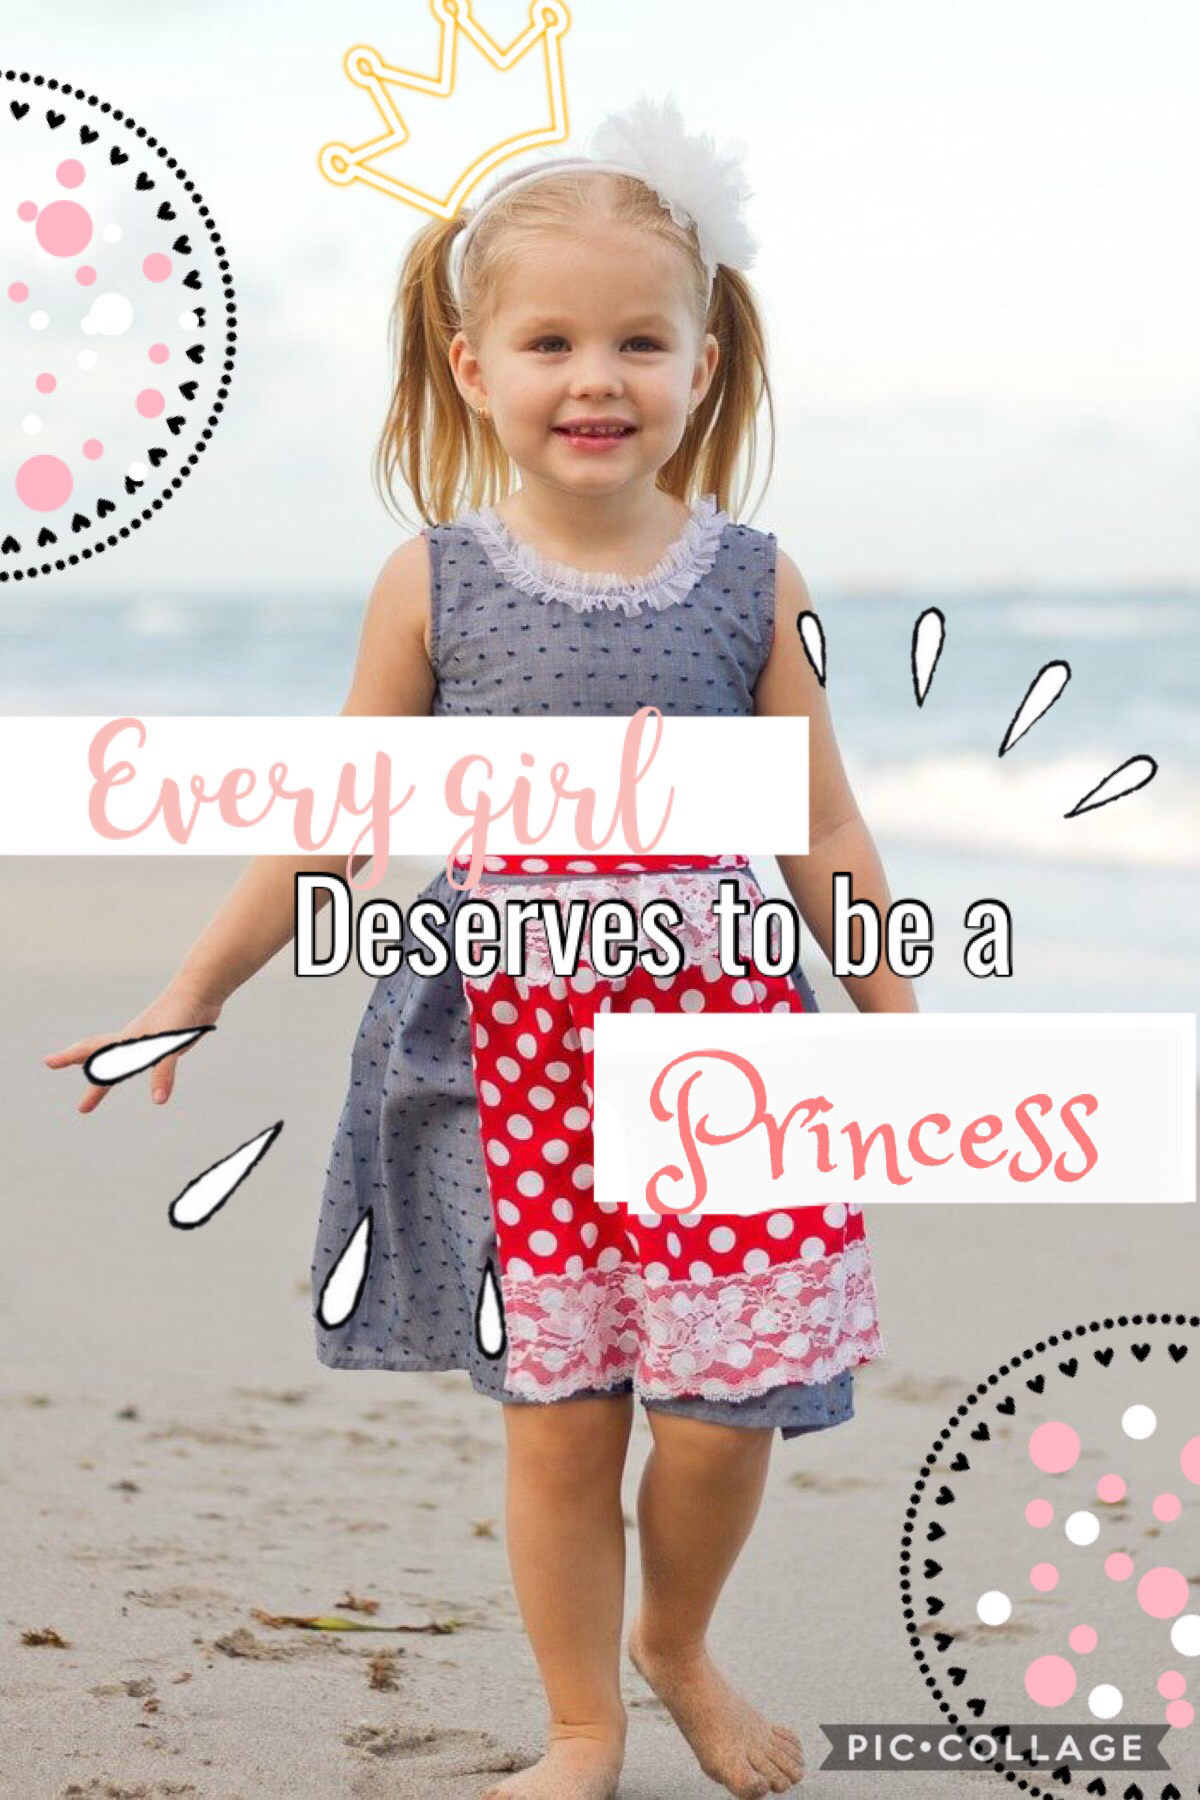 I love this quote and think this little girl is adorable!!